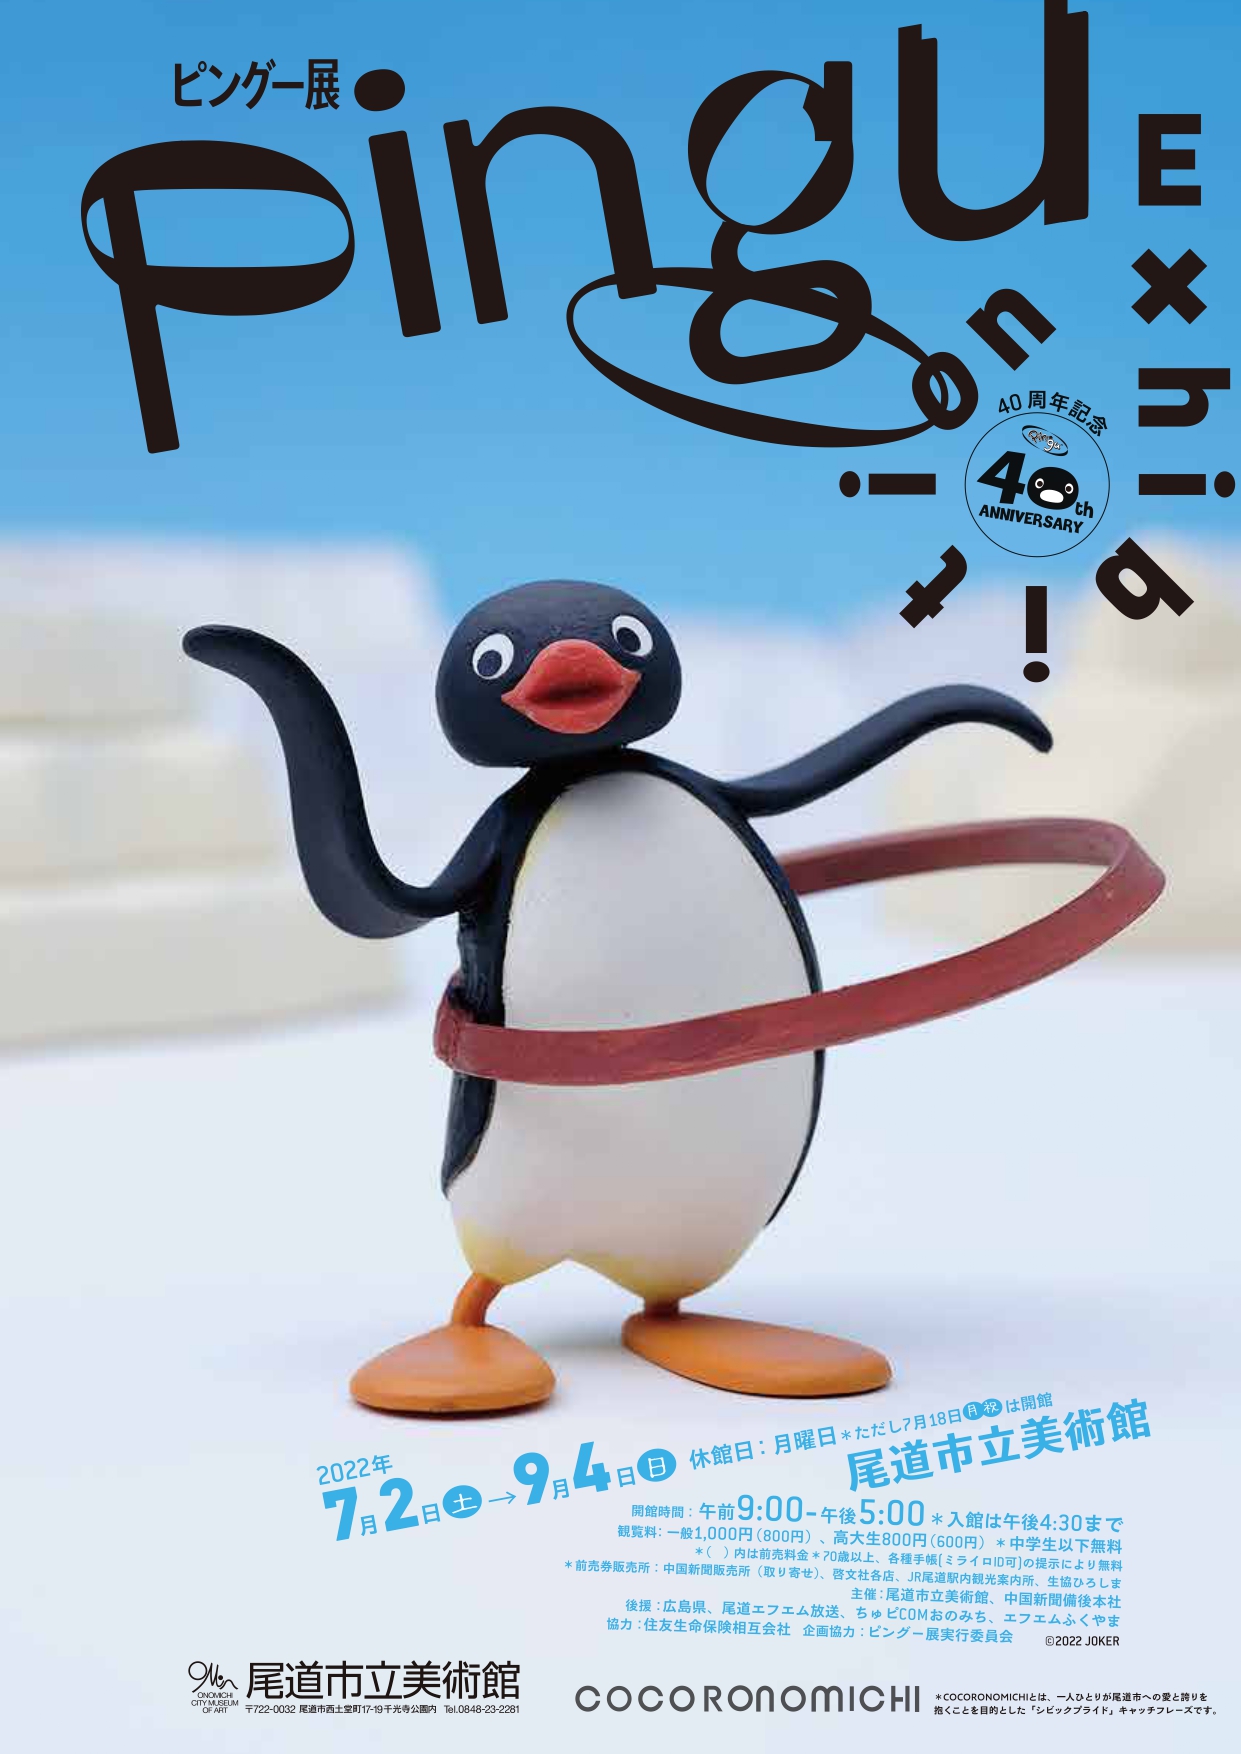 Pingu The Anime Opening (no, not In The City) on Vimeo